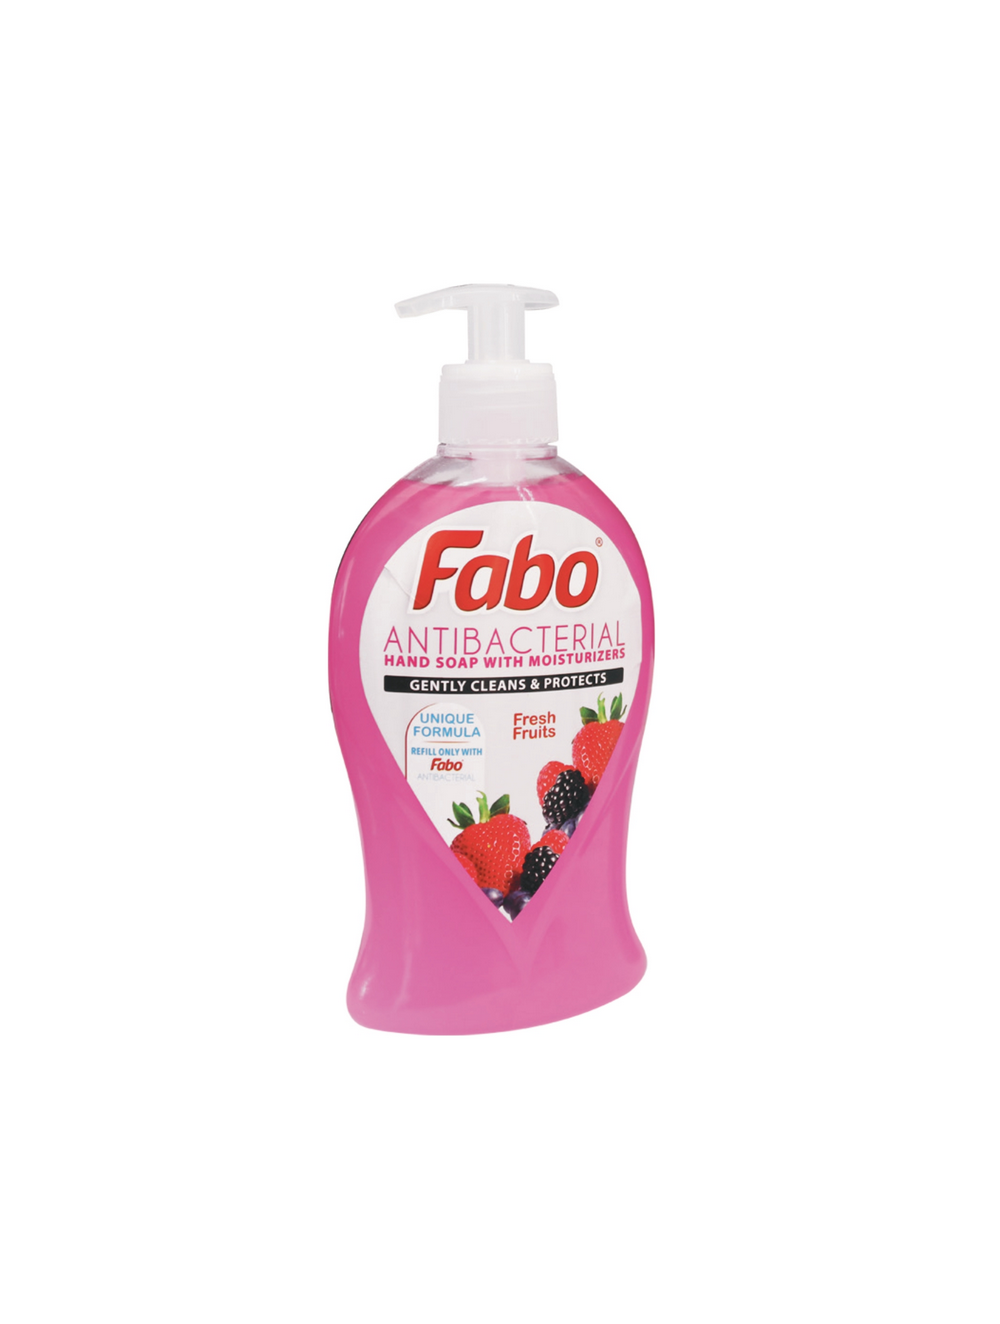 fabo-products_page-0090